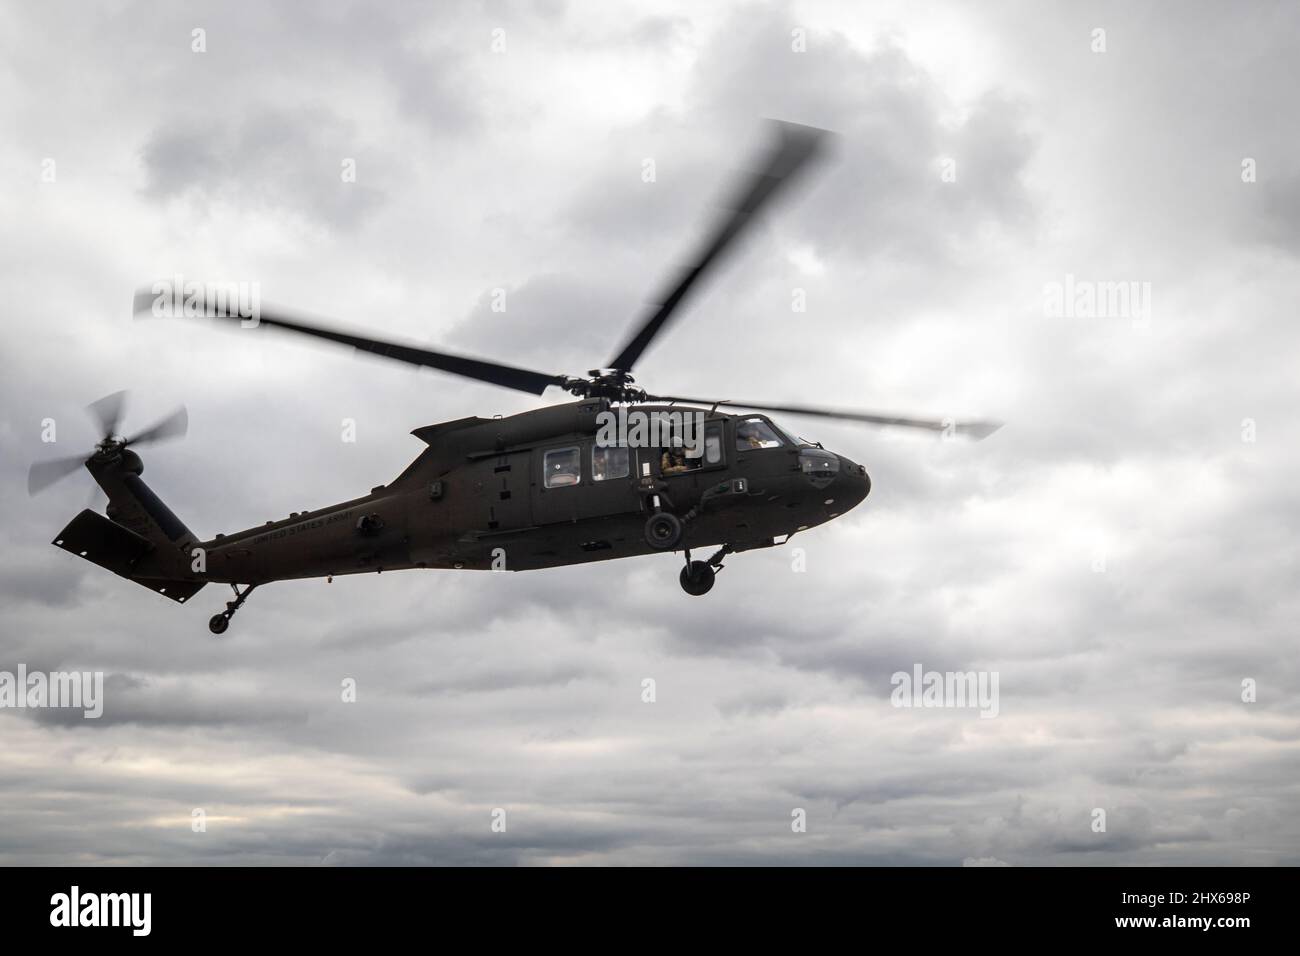 POWIDZ, Poland – 1st Air Cavalry Brigade UH60M Blackhawk helicopter lands in Powidz, Poland, Feb. 26, 2022.     1st Air Cavalry Brigade, which is in Europe for Atlantic Resolve, moved 20 AH64 Apaches and over 400 personnel to Poland from Greece and Germany in less than 5 days to support the United States’ decision to increase its presence and activities in Poland as part of its strong and unremitting commitment to our NATO allies and partners. (U.S. Army Photo by Capt. Taylor Criswell) Stock Photo